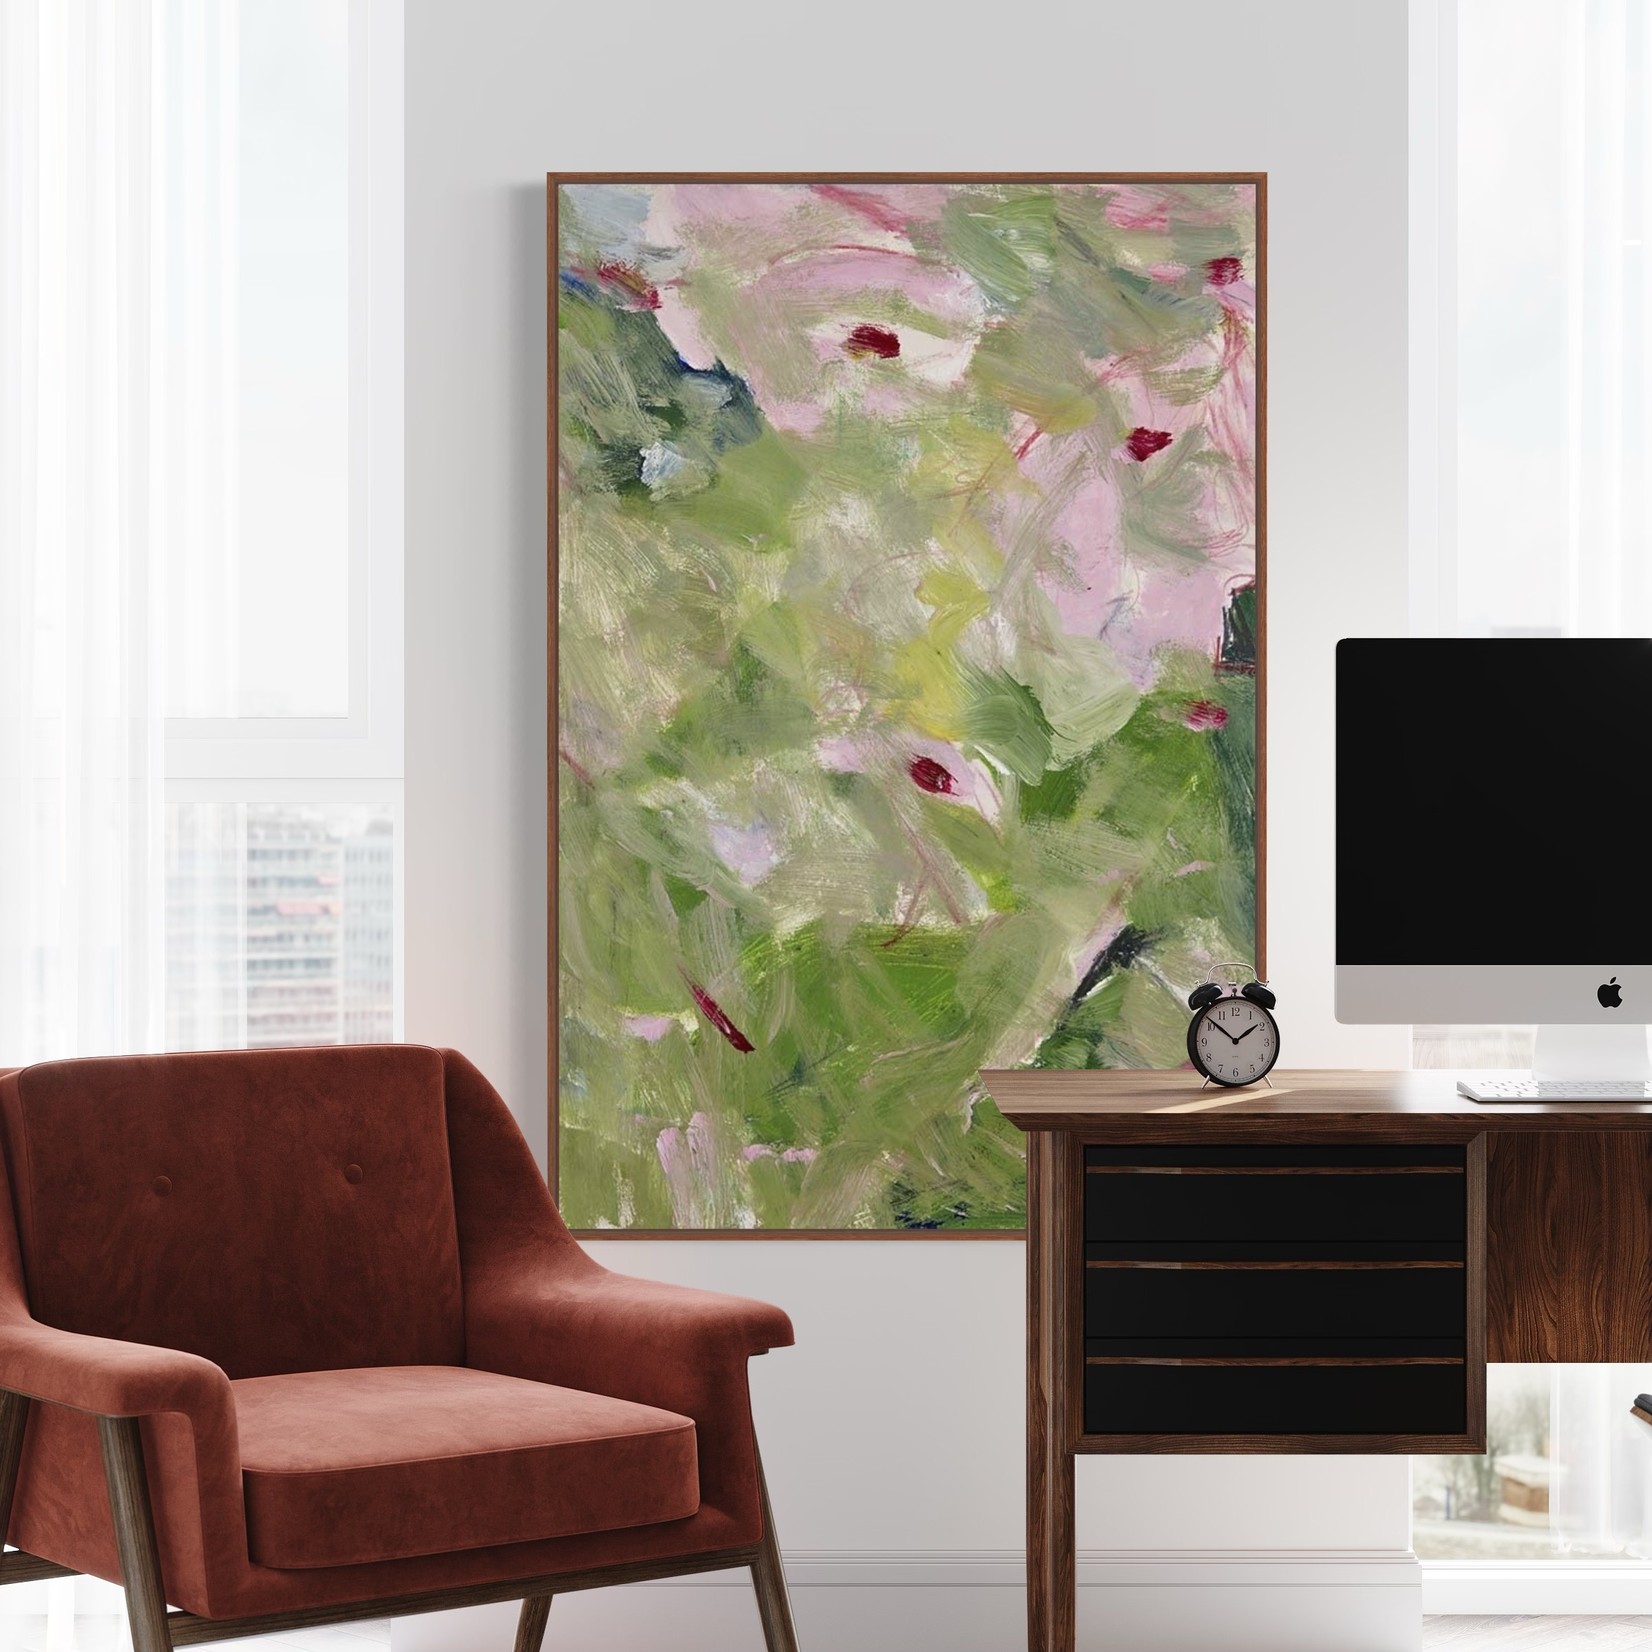 Stretched Print on Canvas Nature Studies 4 Canvas by Evelyn Ogly